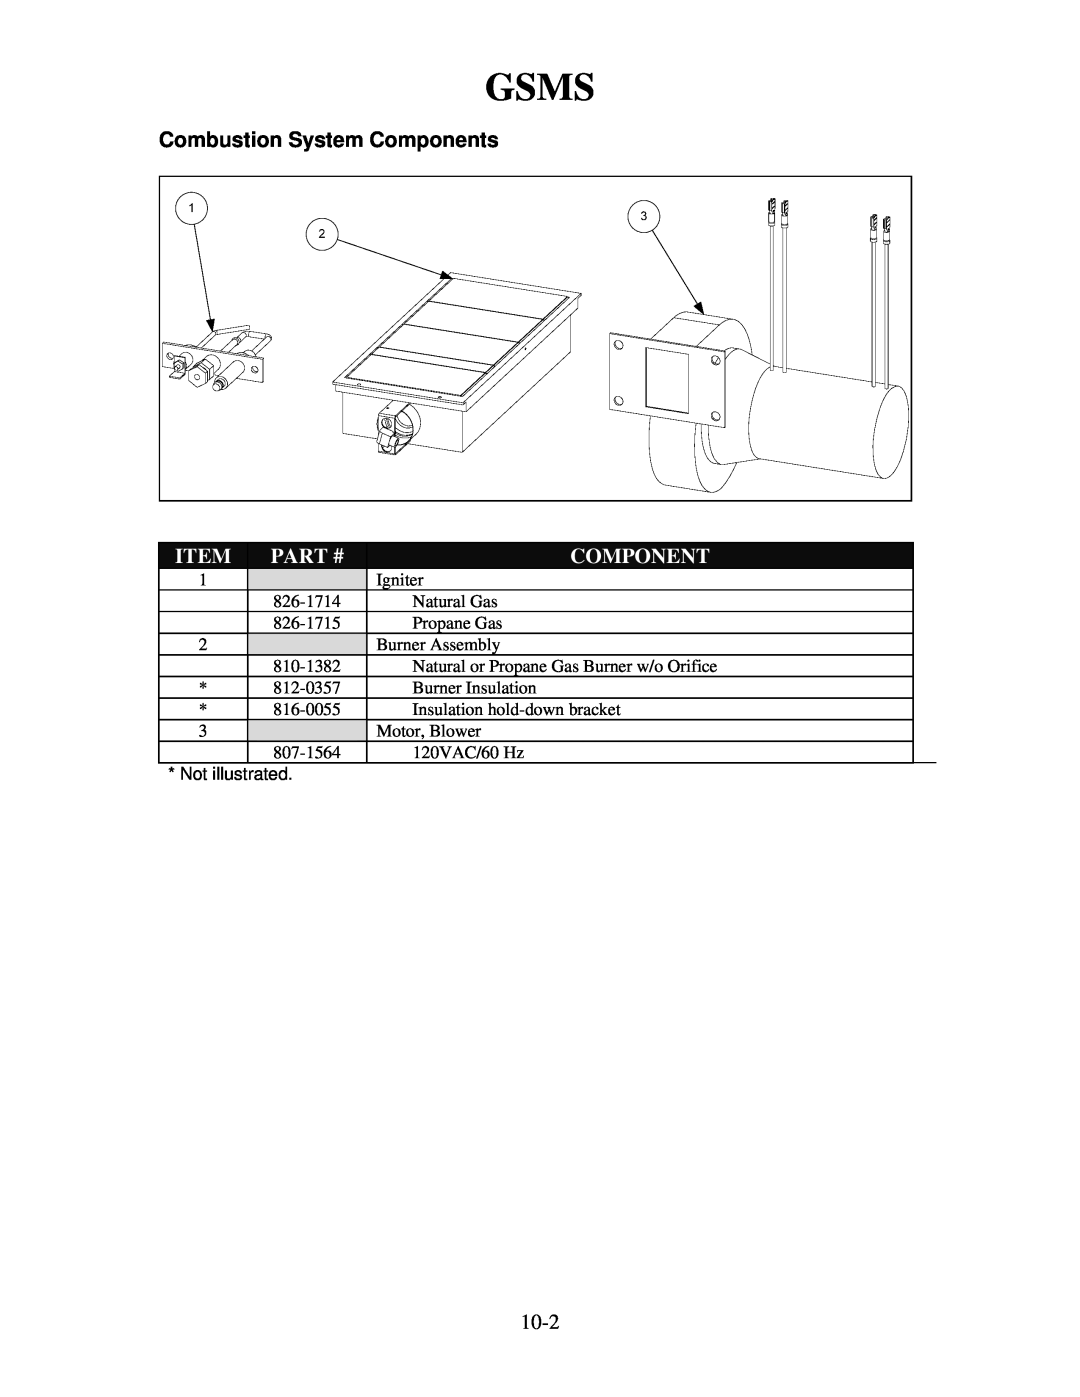 Frymaster 8196321 manual Gsms, Combustion System Components, Part # 